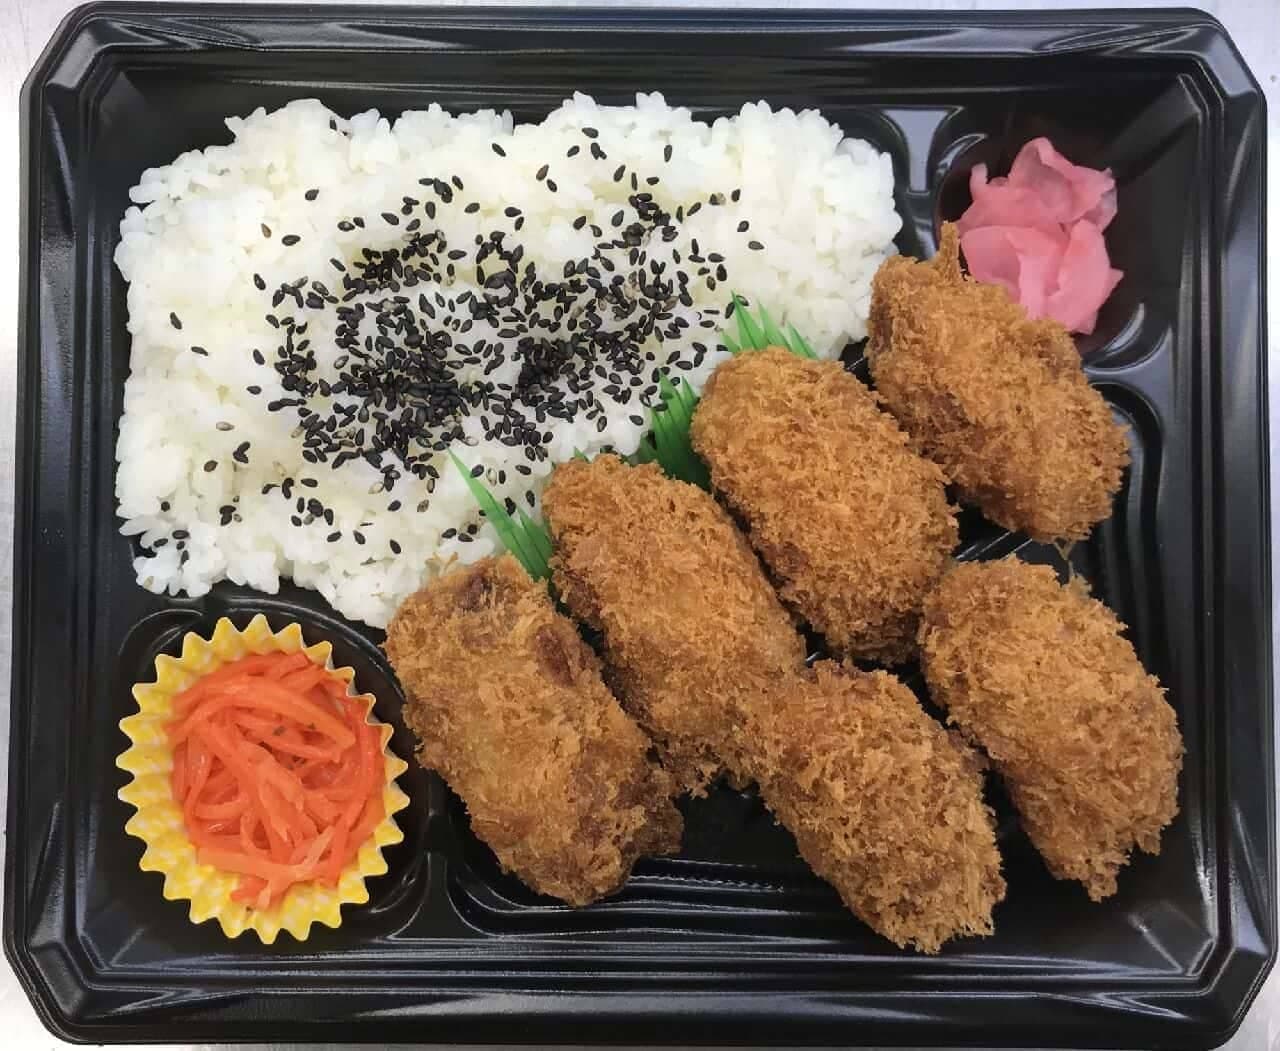 Ministop "Fried Oyster Bento